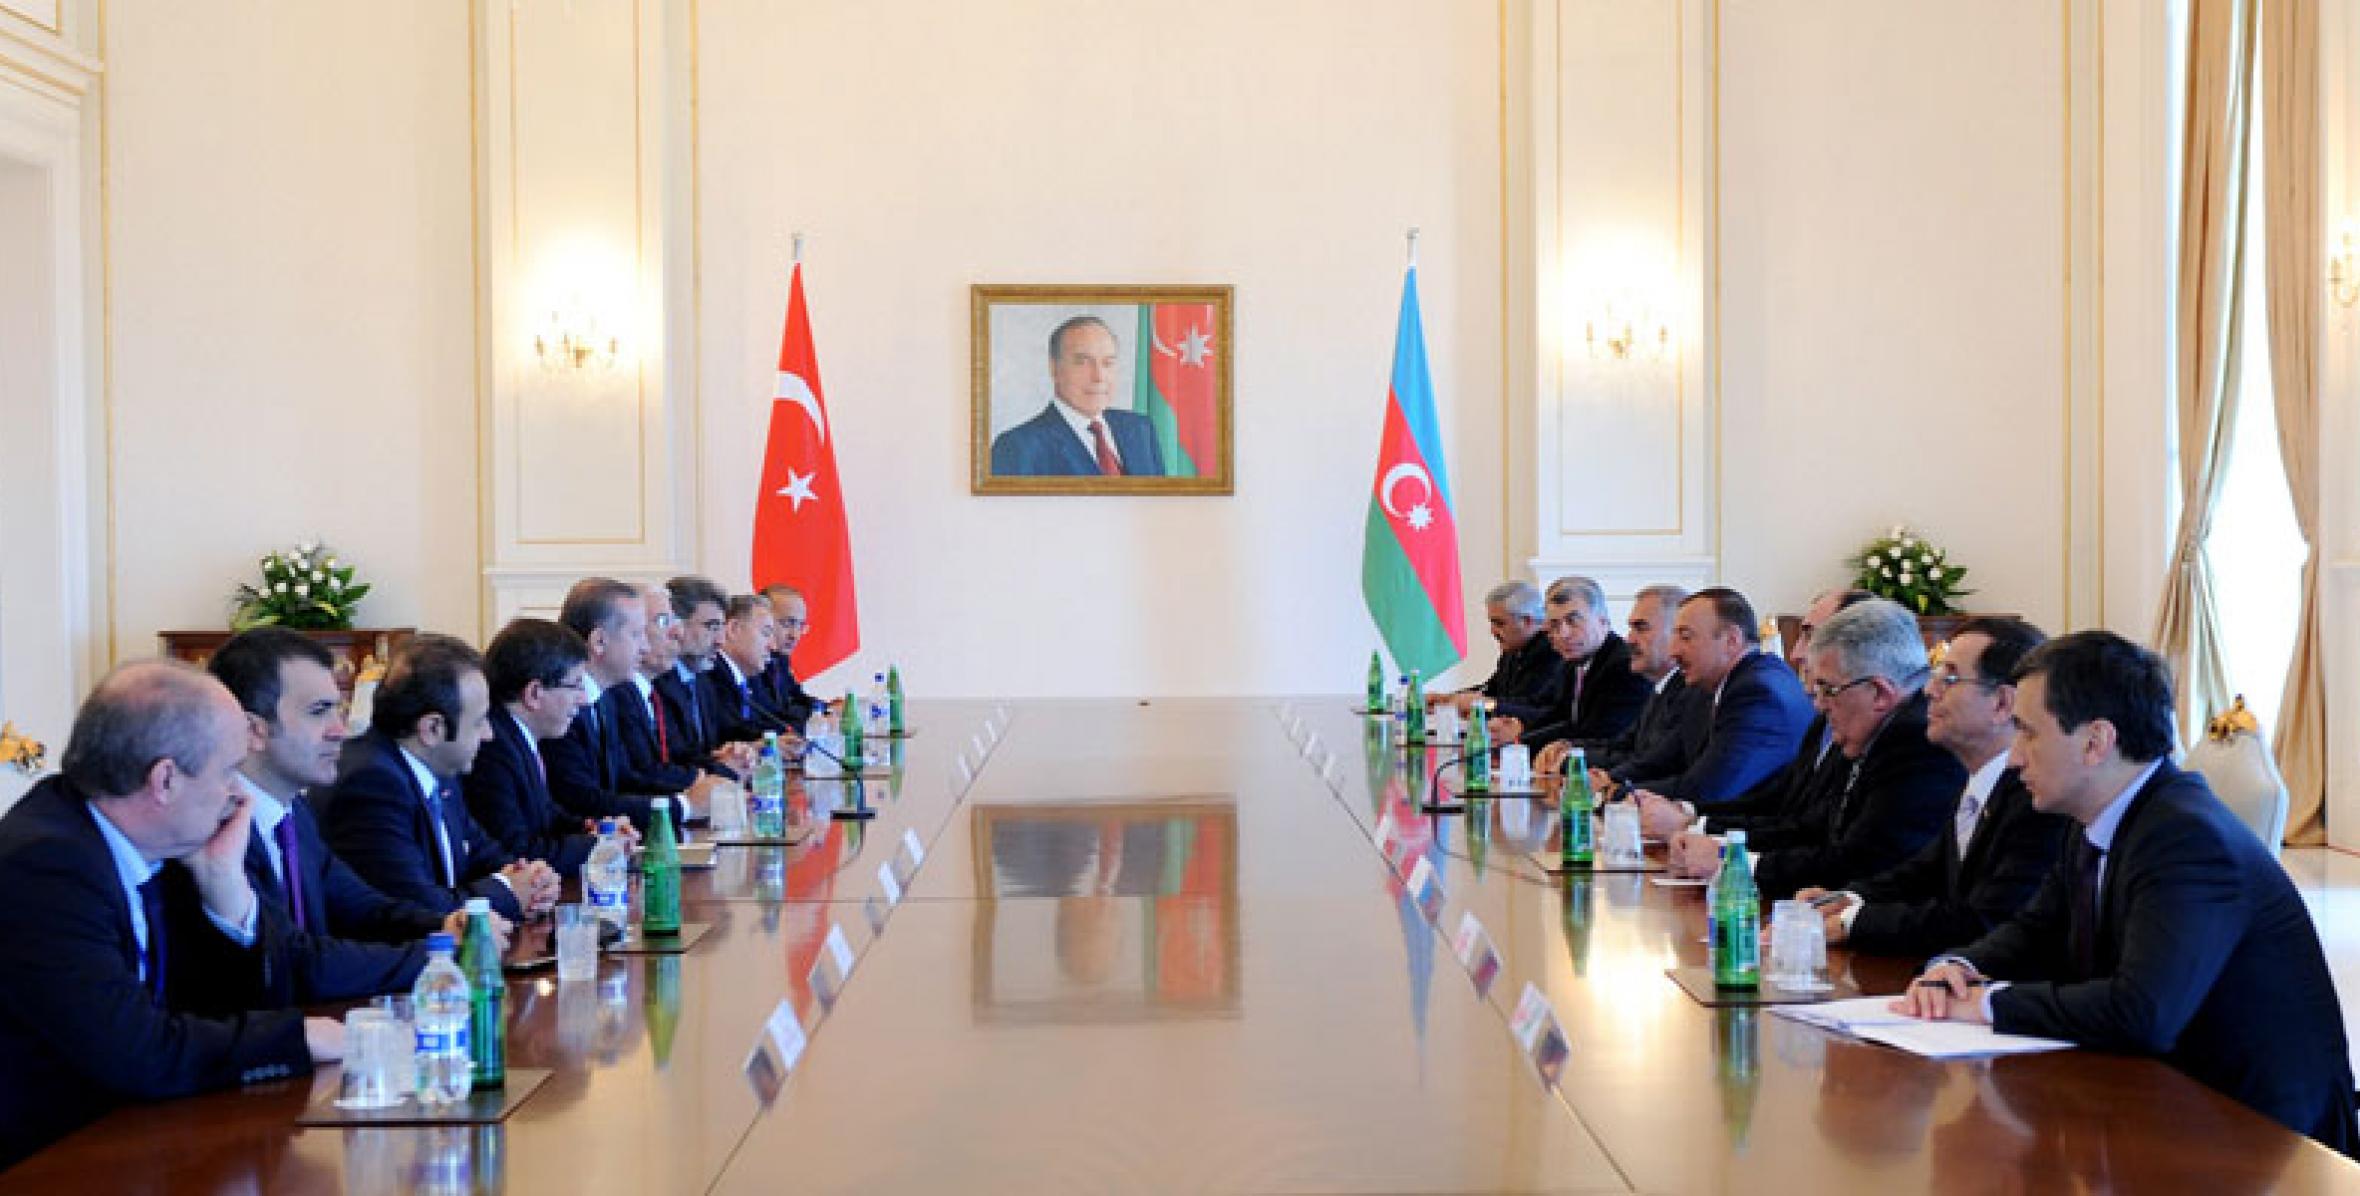 Azerbaijan President and Turkish Prime Minister held a meeting in the presence of delegations